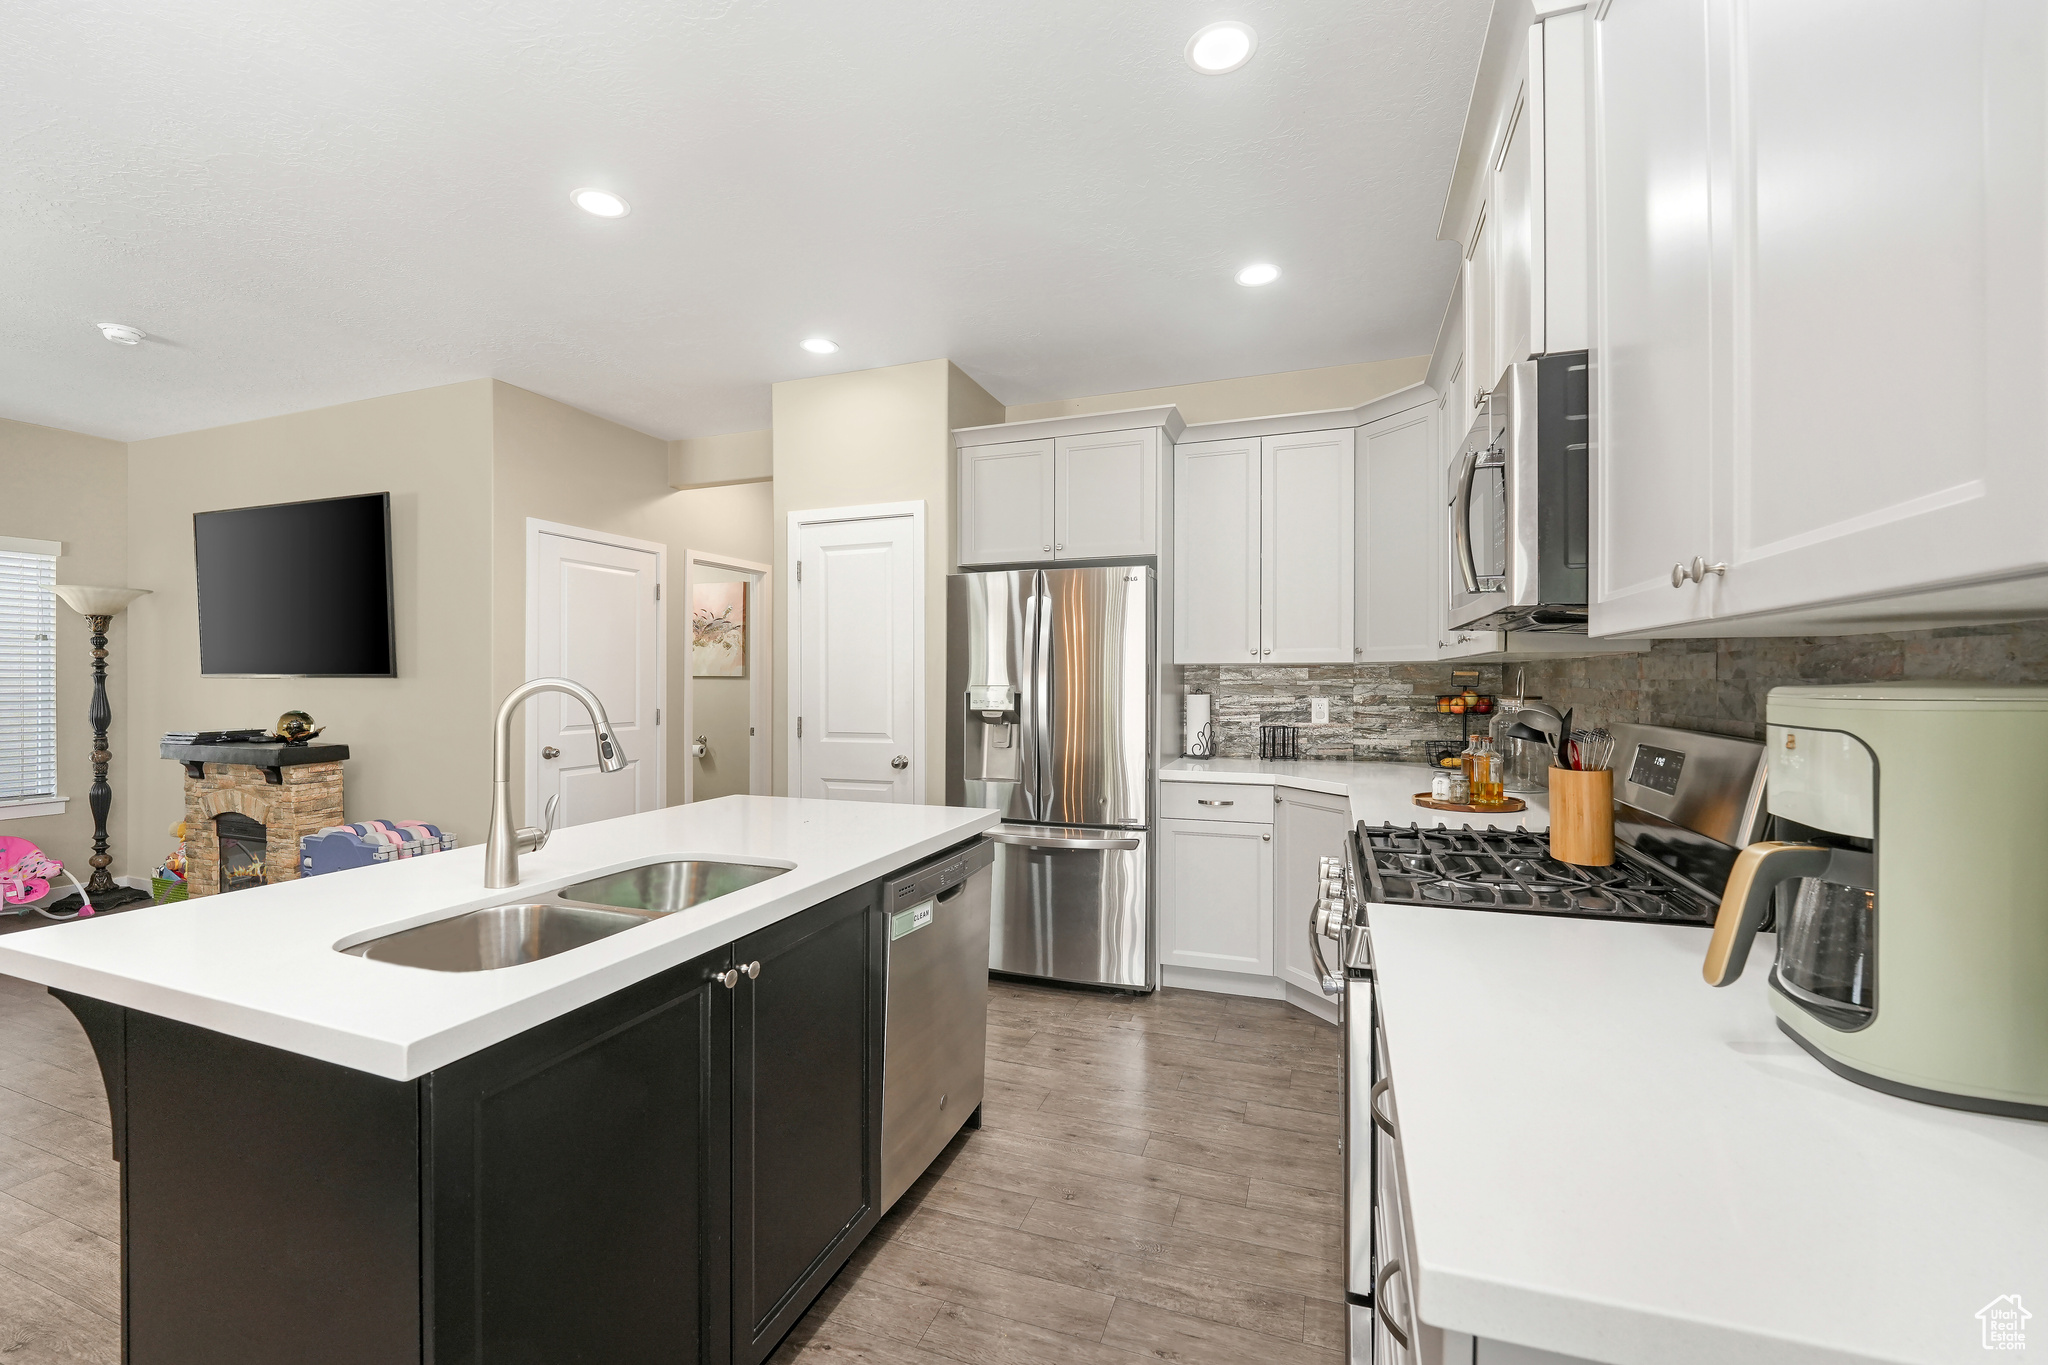 Kitchen featuring appliances with stainless steel finishes, a center island with sink, tasteful backsplash, sink, and light wood-type flooring